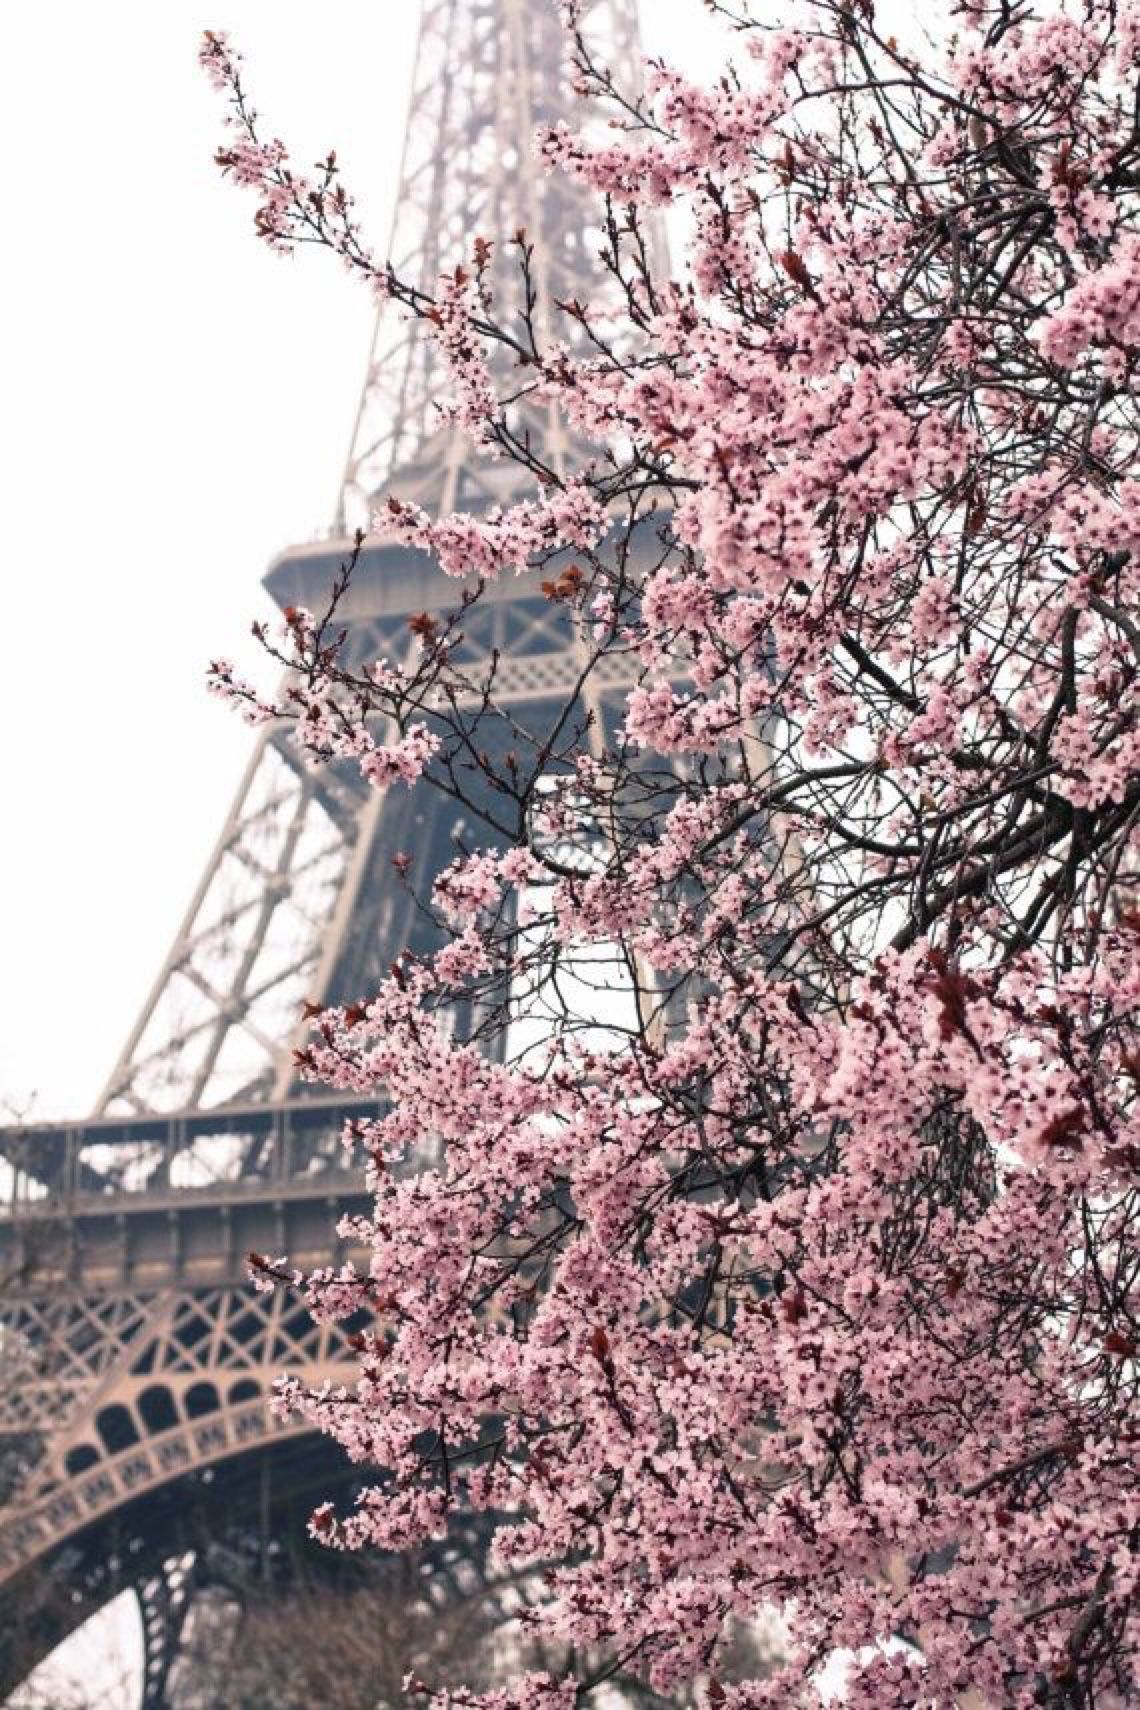 The Eiffel Tower with pink cherry blossoms in the foreground - Paris, Eiffel Tower